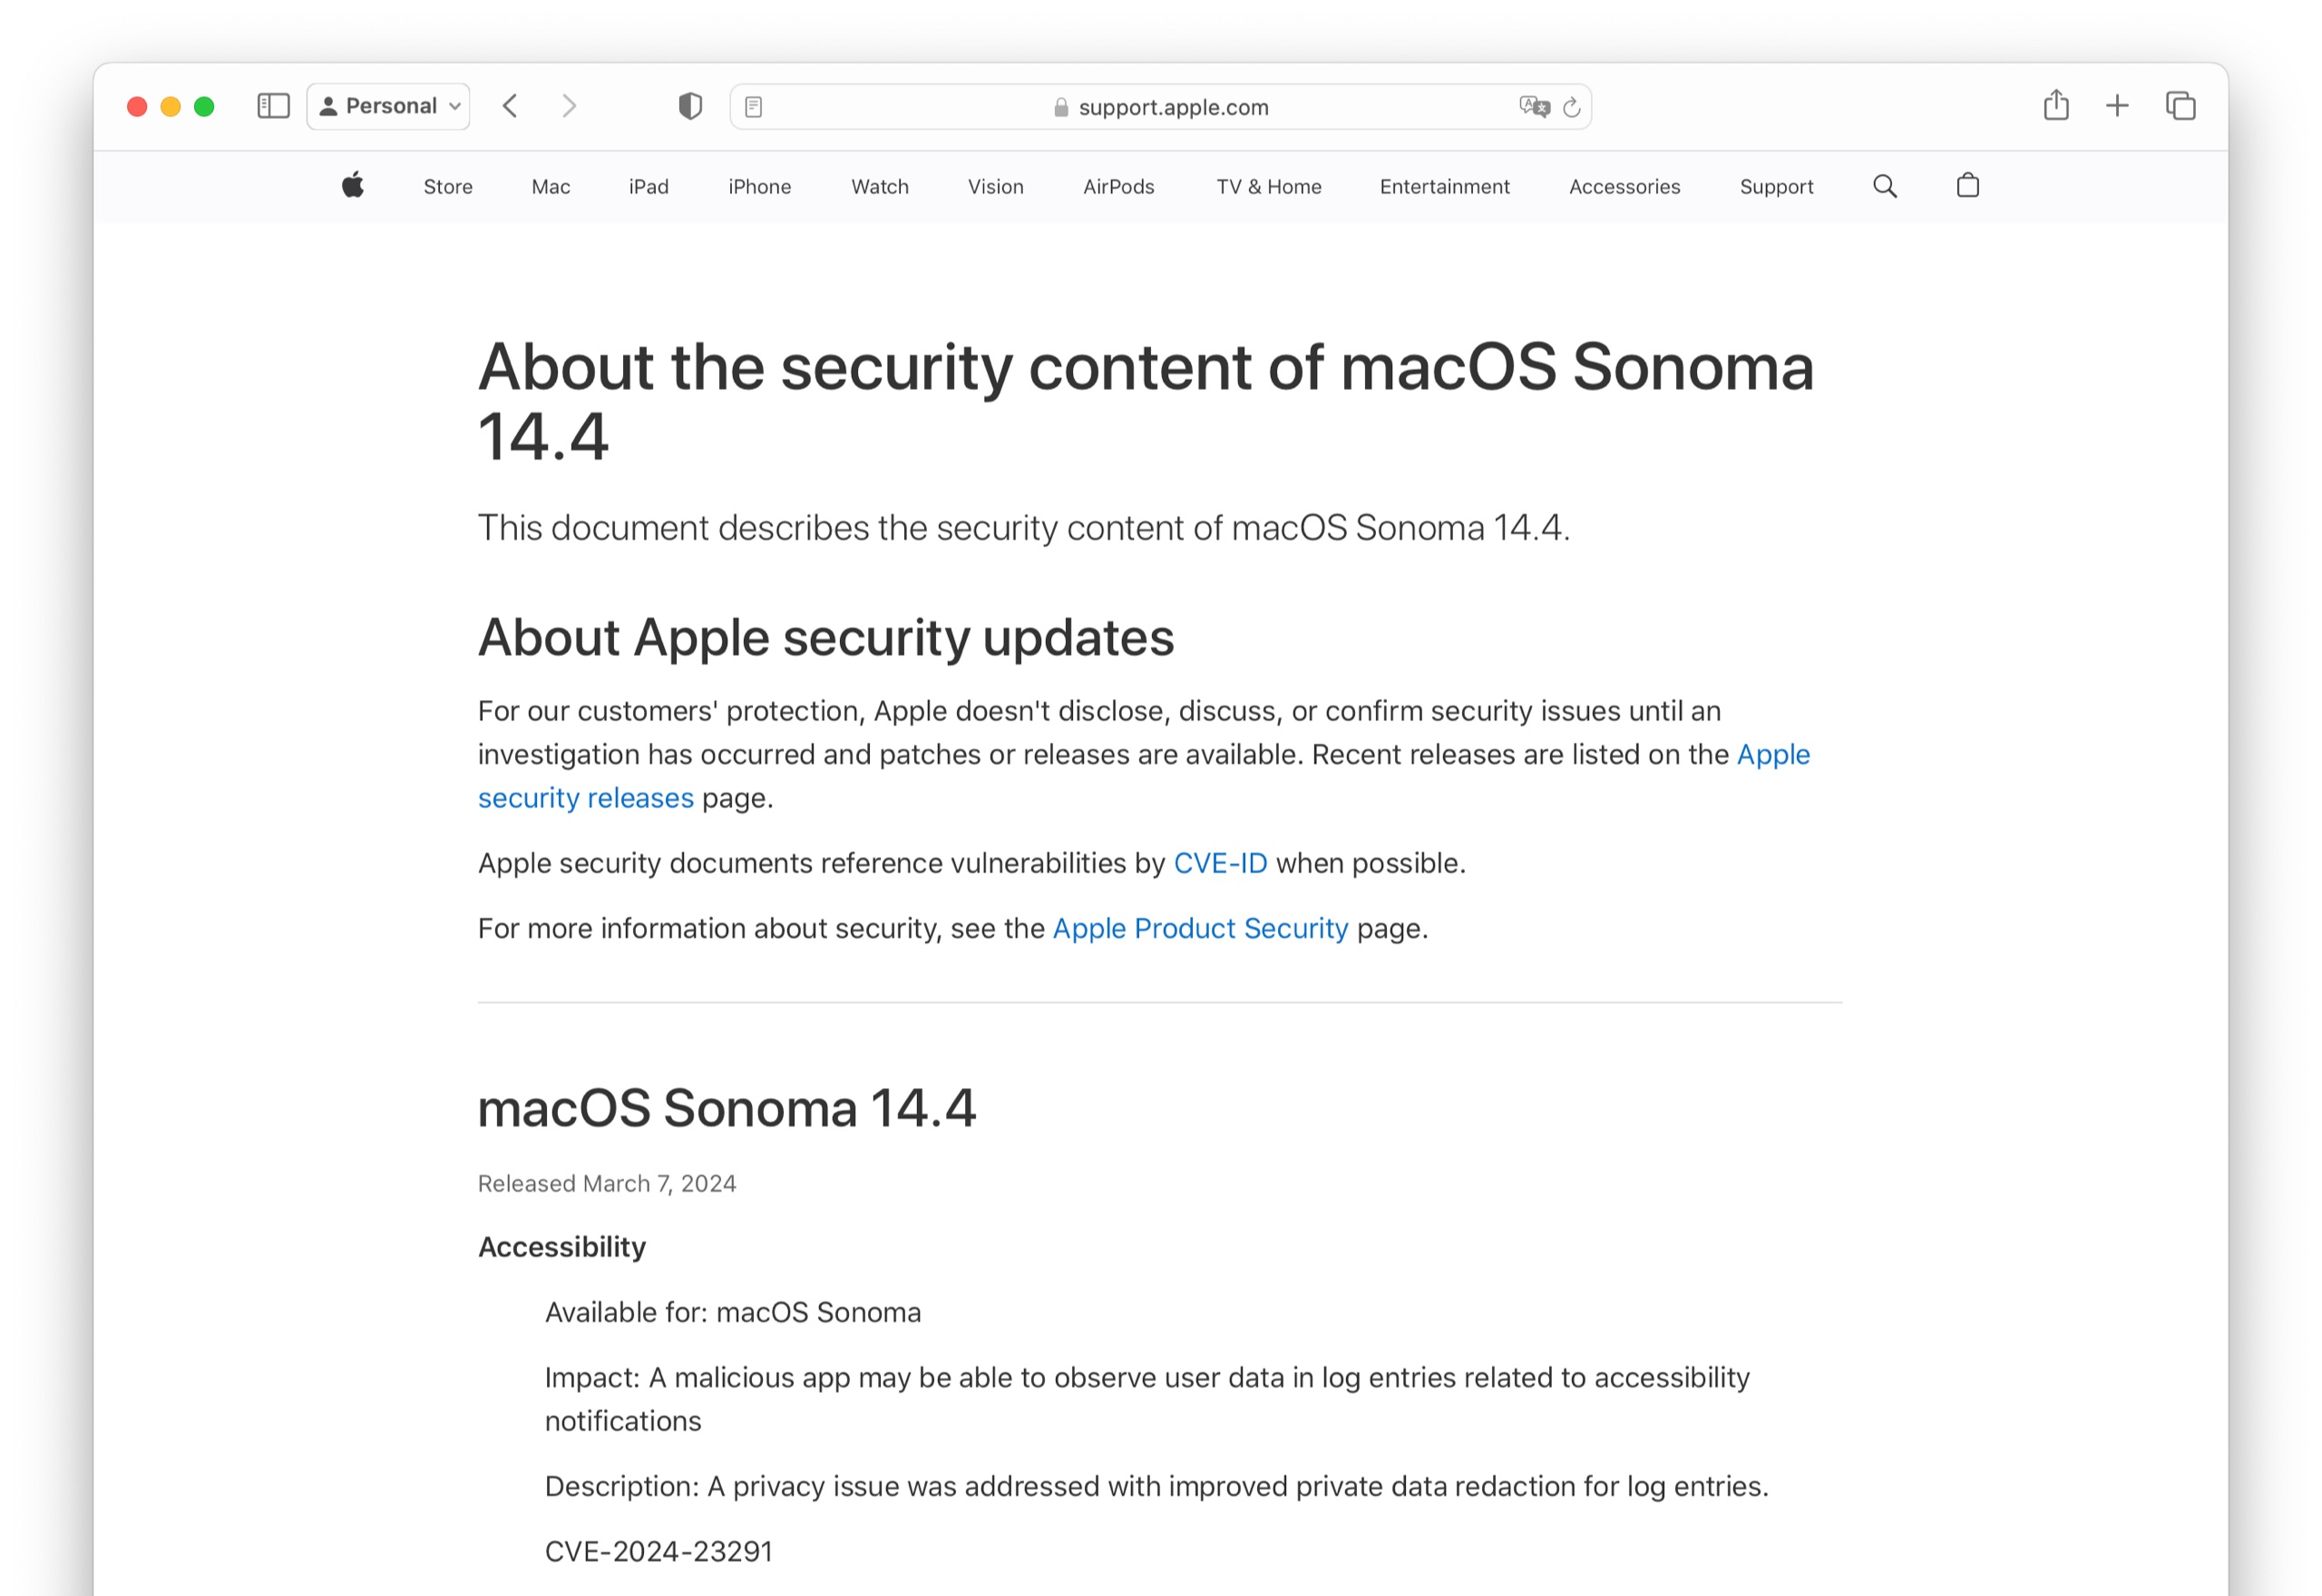 About the security content of macOS Sonoma 14.4